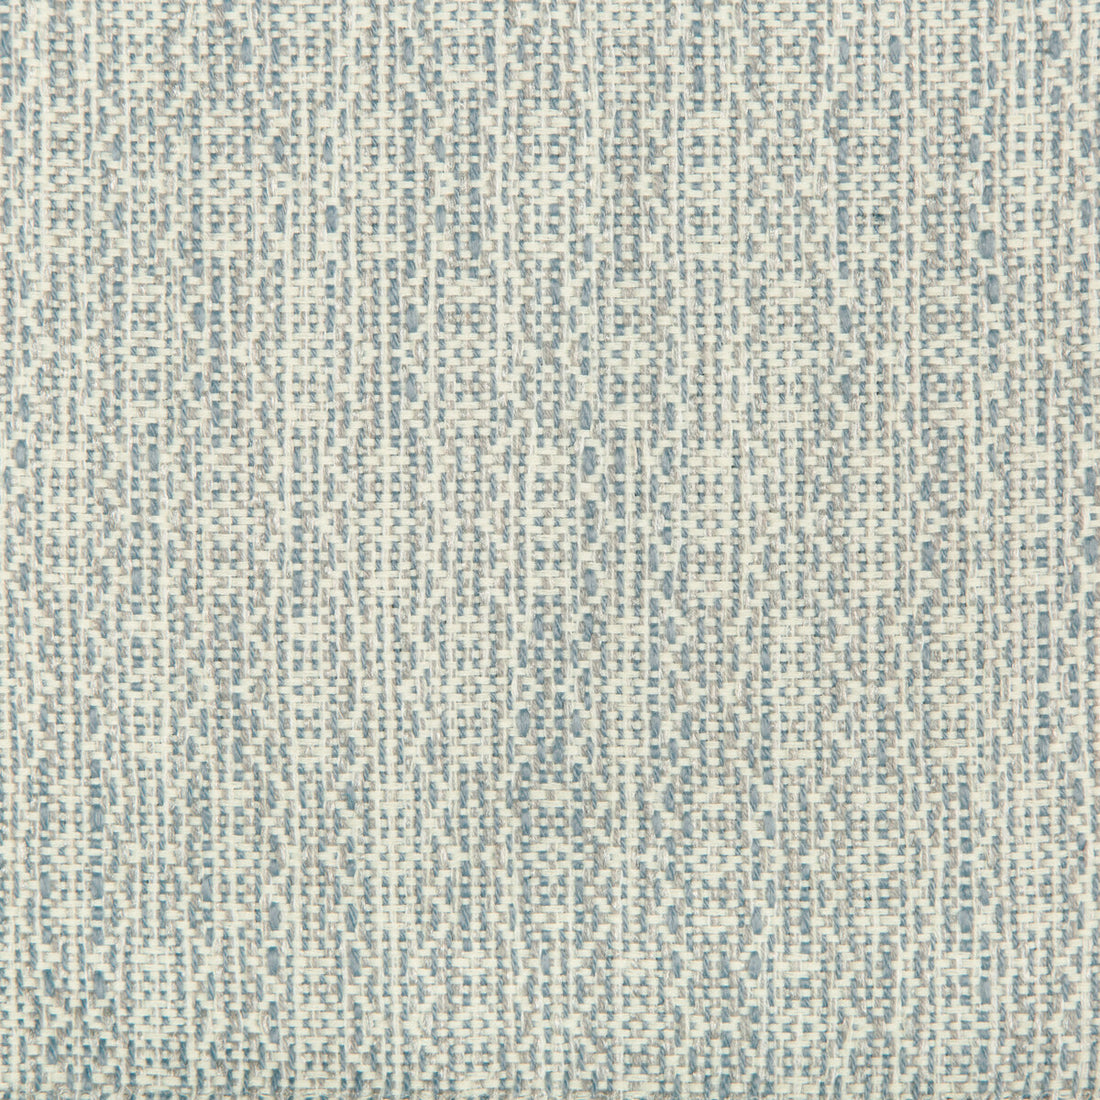 Kravet Smart fabric in 34625-1511 color - pattern 34625.1511.0 - by Kravet Smart in the Performance Crypton Home collection